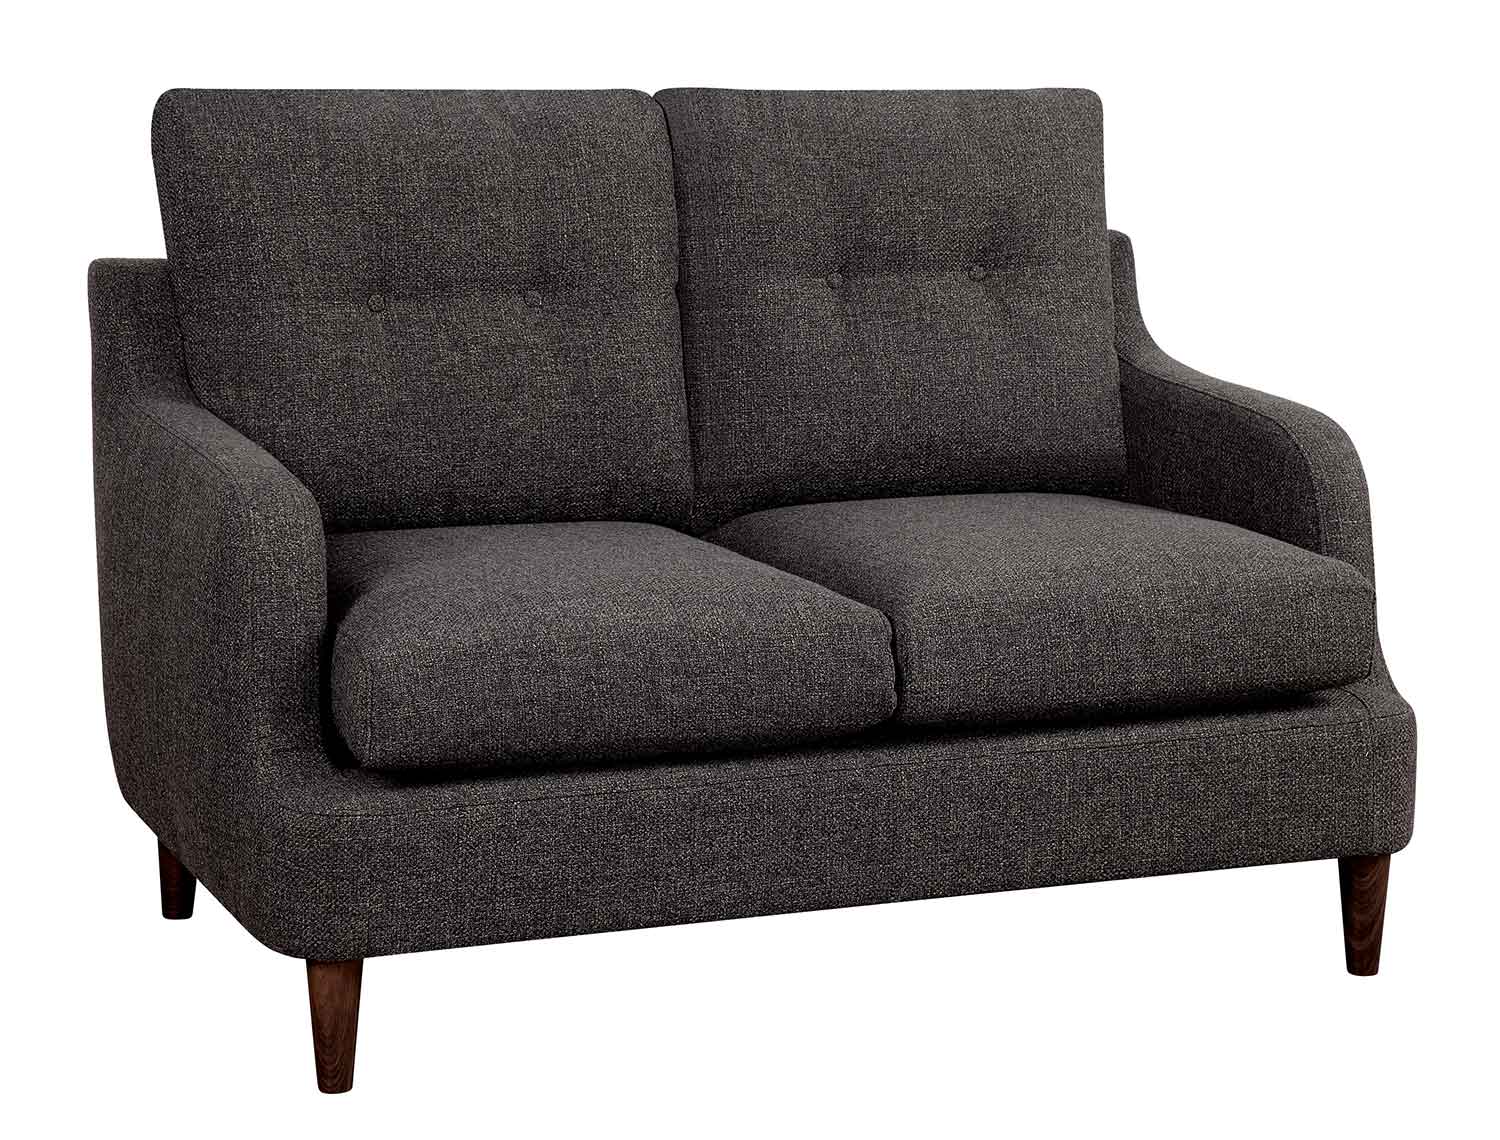 Homelegance Cagle Love Seat - Chocolate